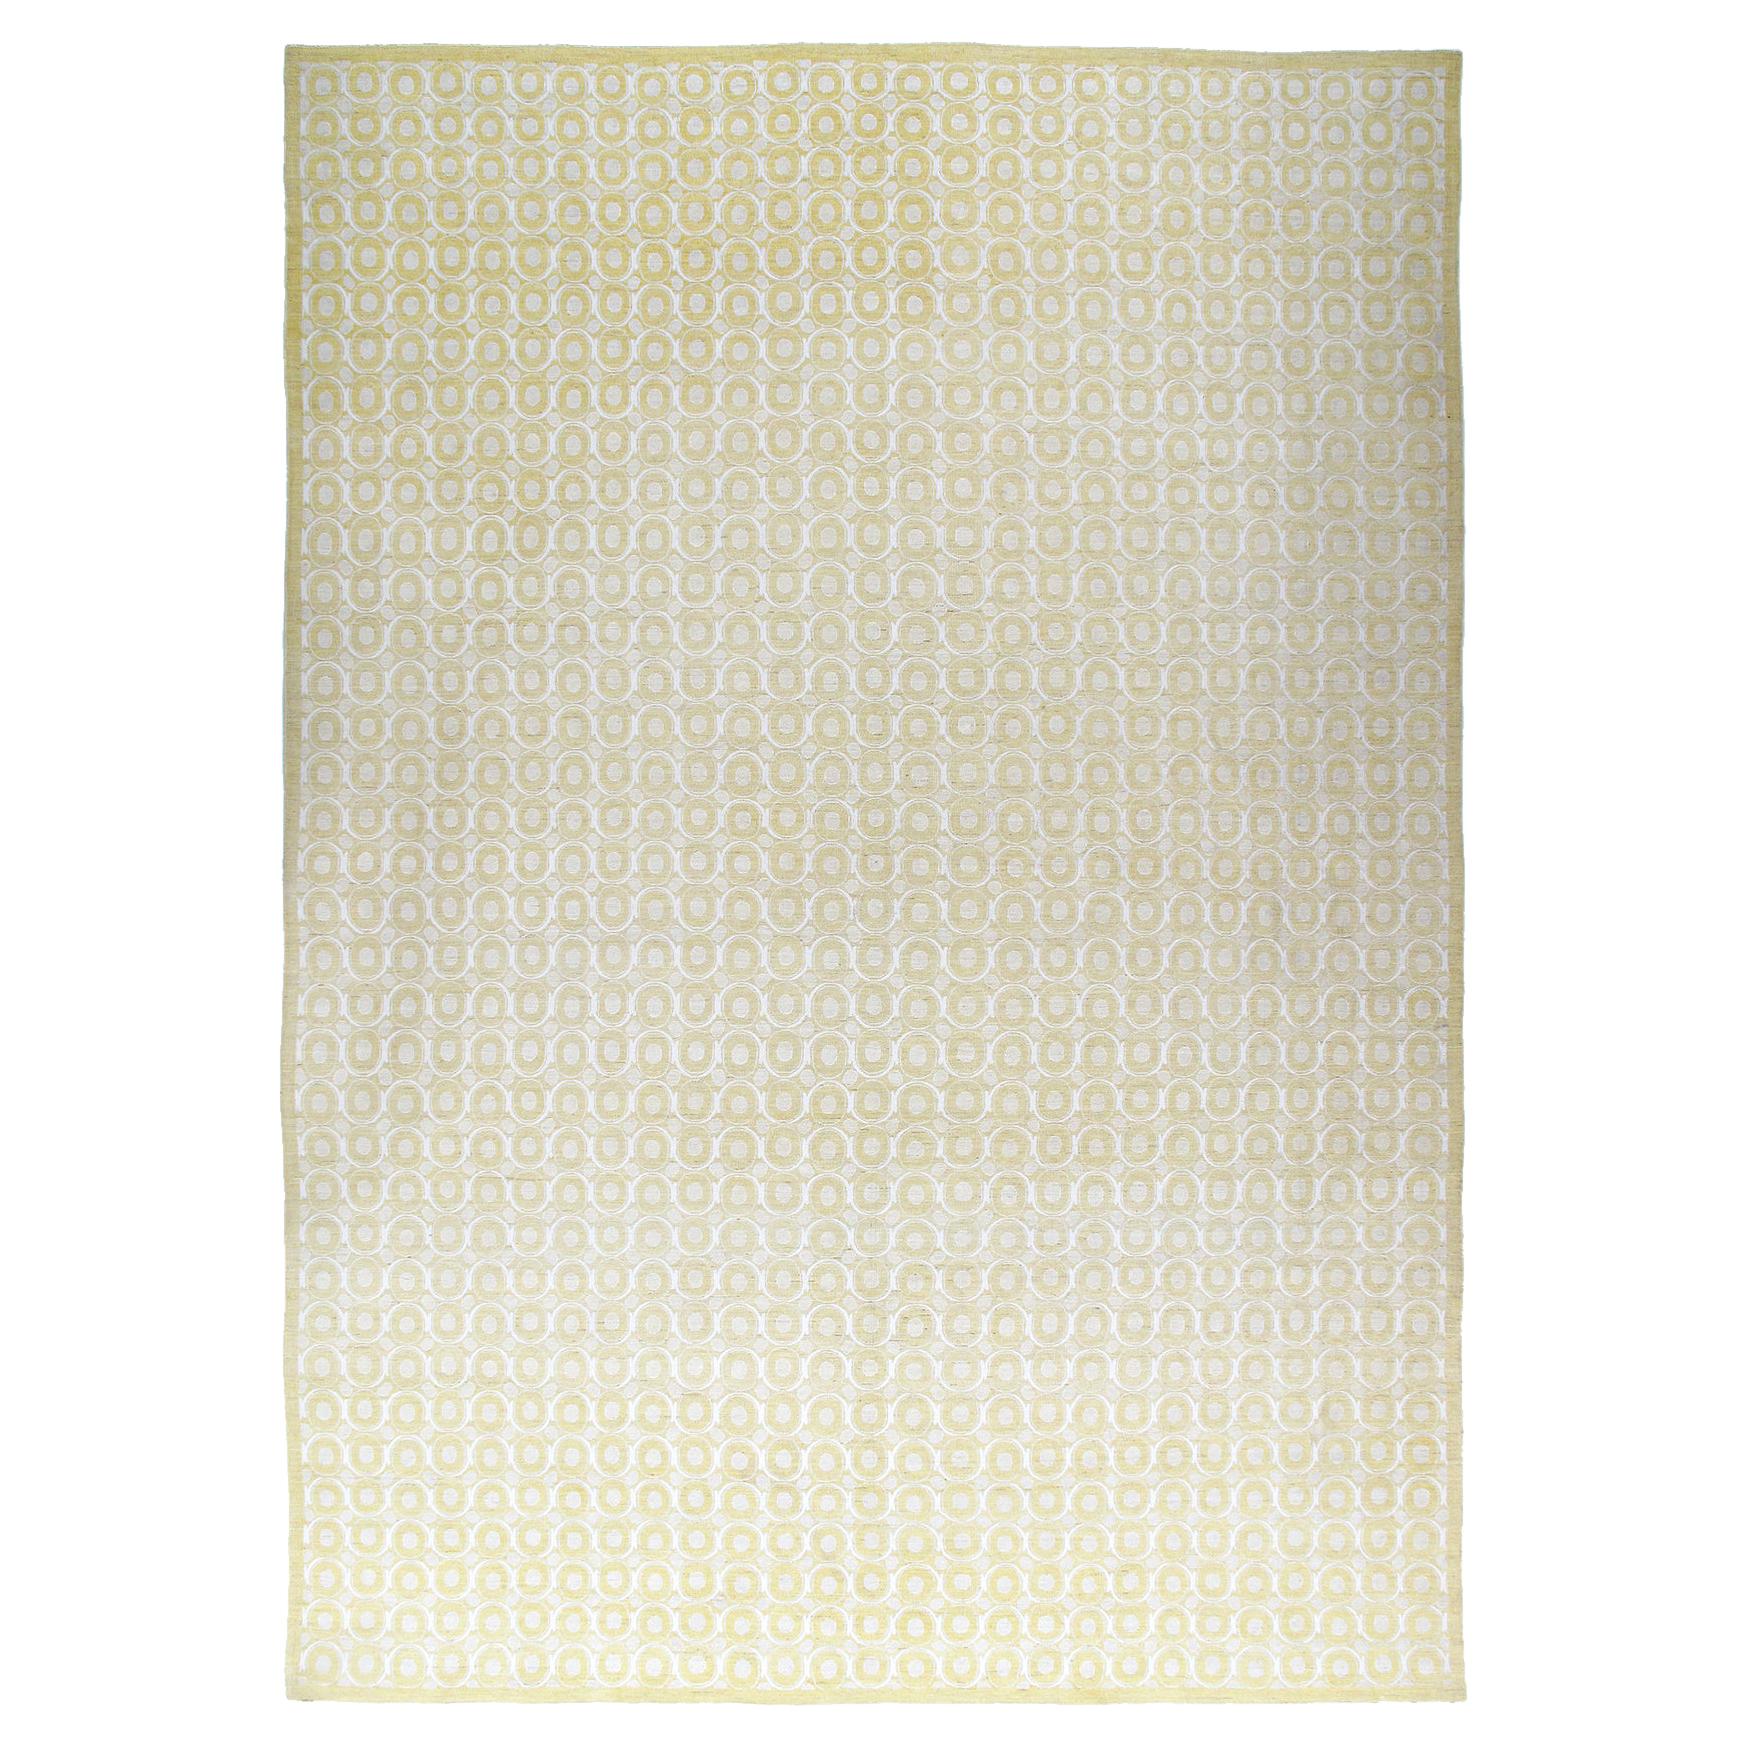 Decorative Modern Handknotted Rug with a Subtle, Geometric Pattern